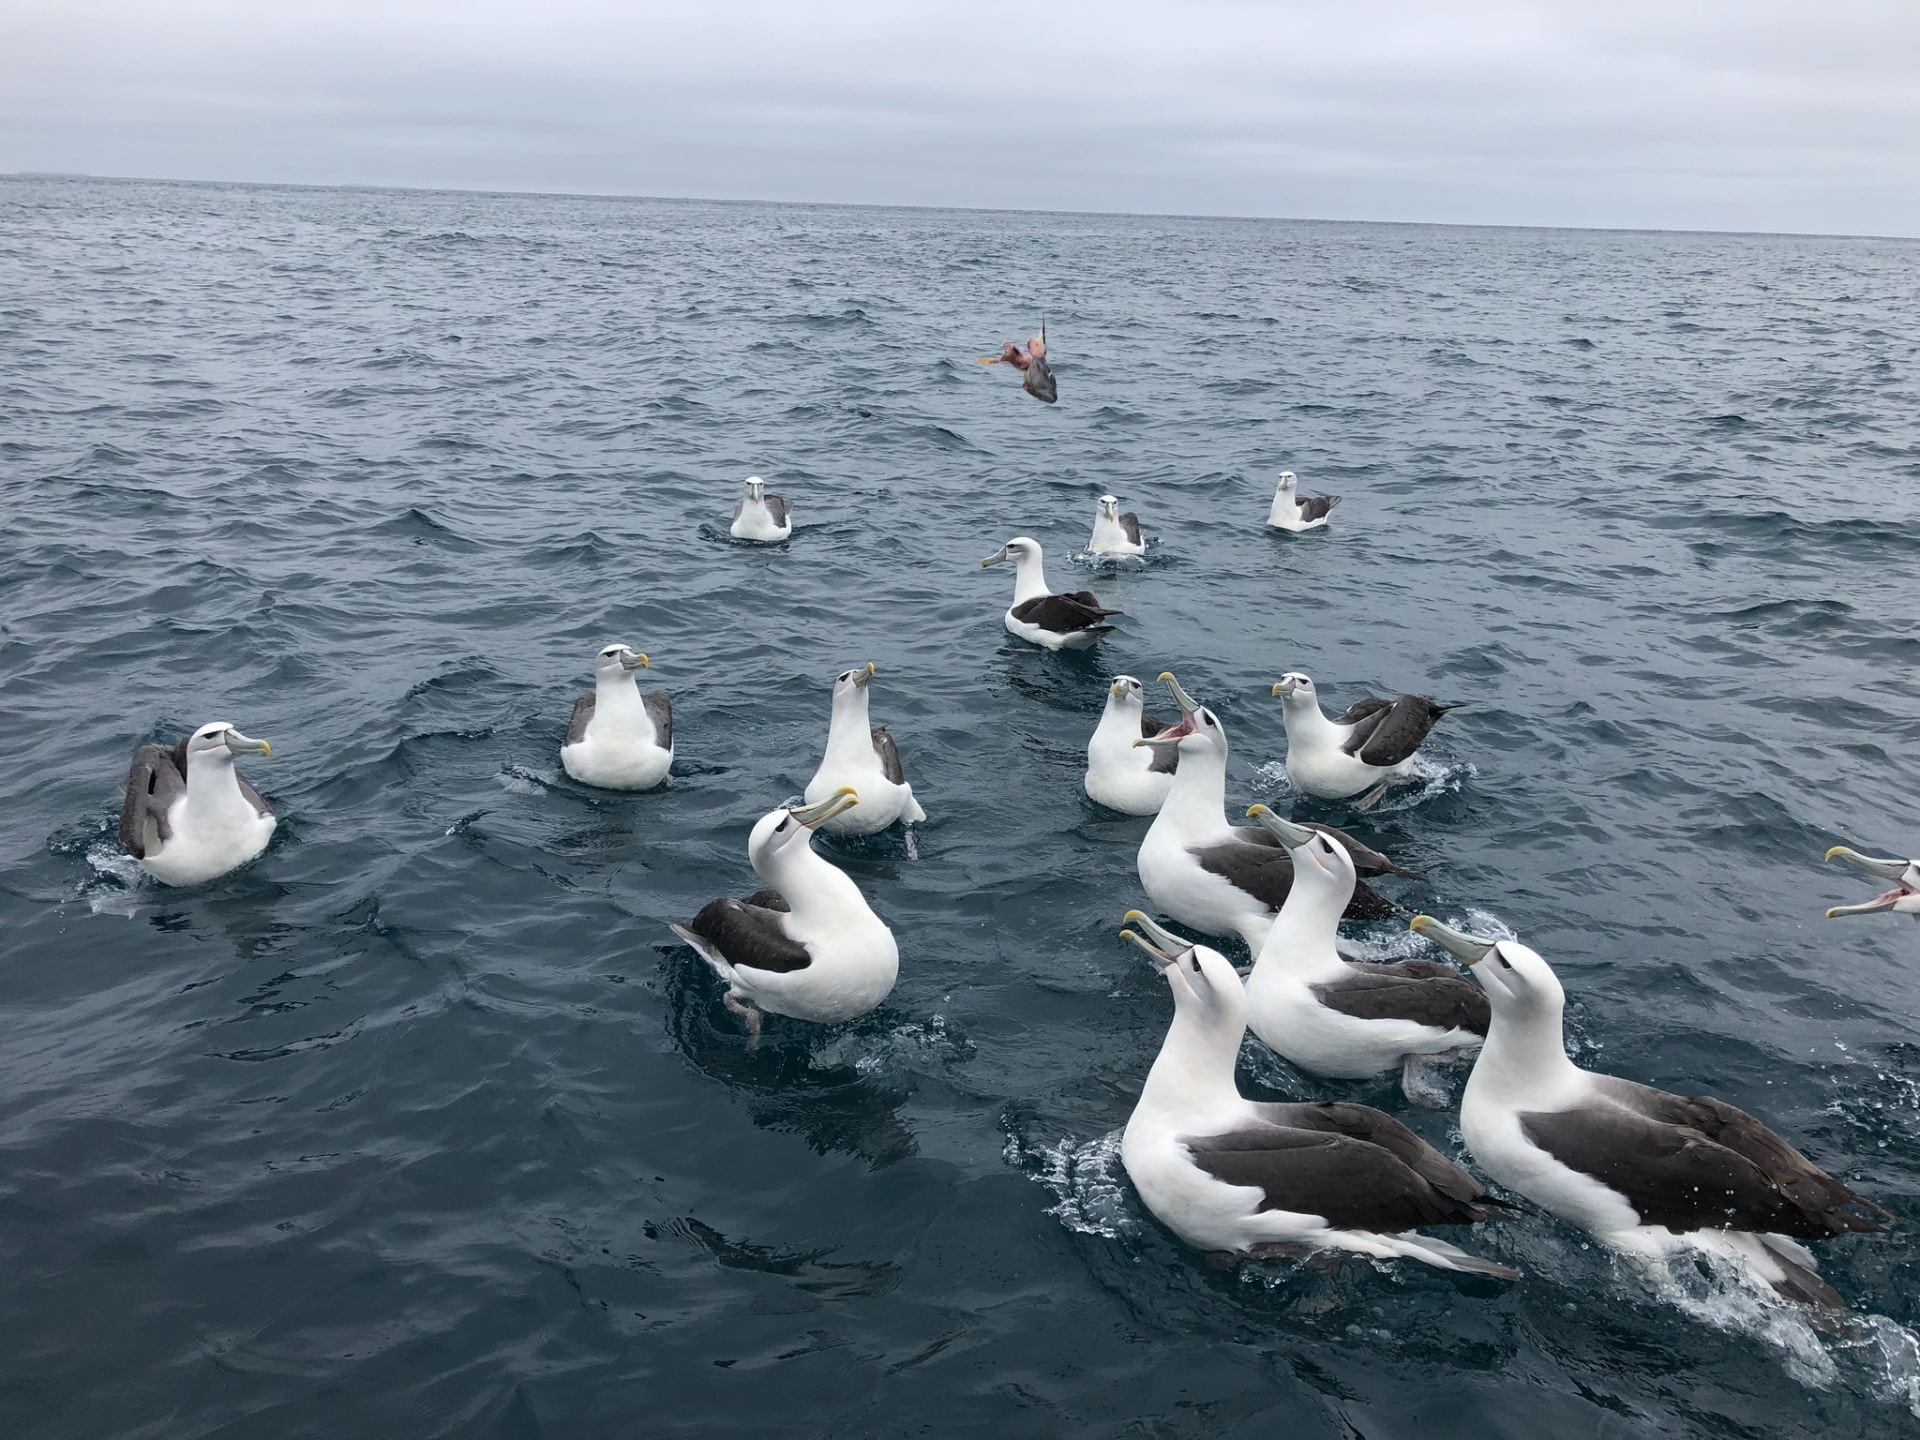 A piece of fish is thrown to a group of around 15 albatrosses sitting on the sea surface. One albatross has its beak wide open to catch the fish. It is a grey day and the sea is dark